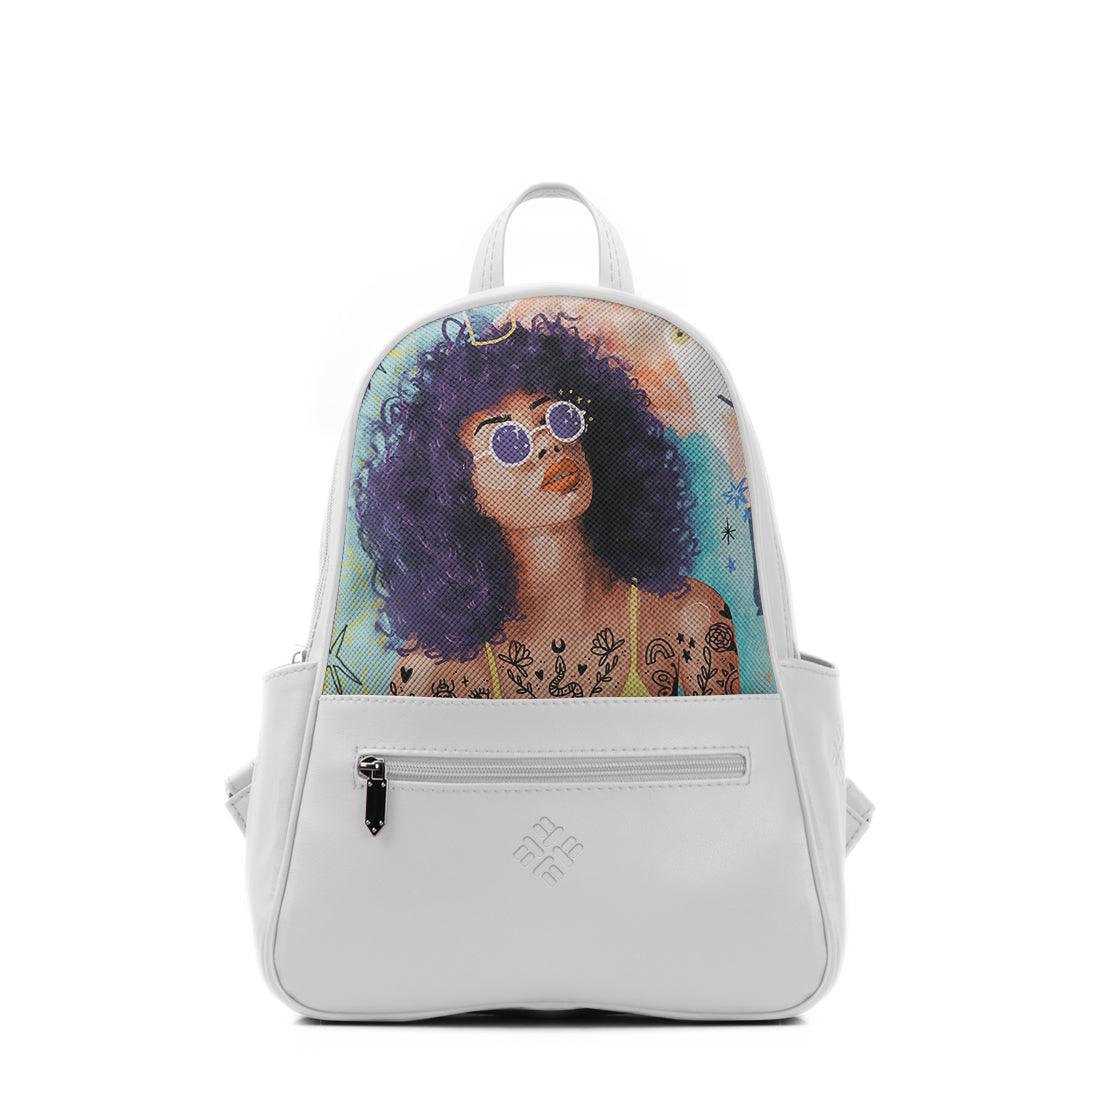 White Vivid Backpack Flamingo Queen - CANVAEGYPT